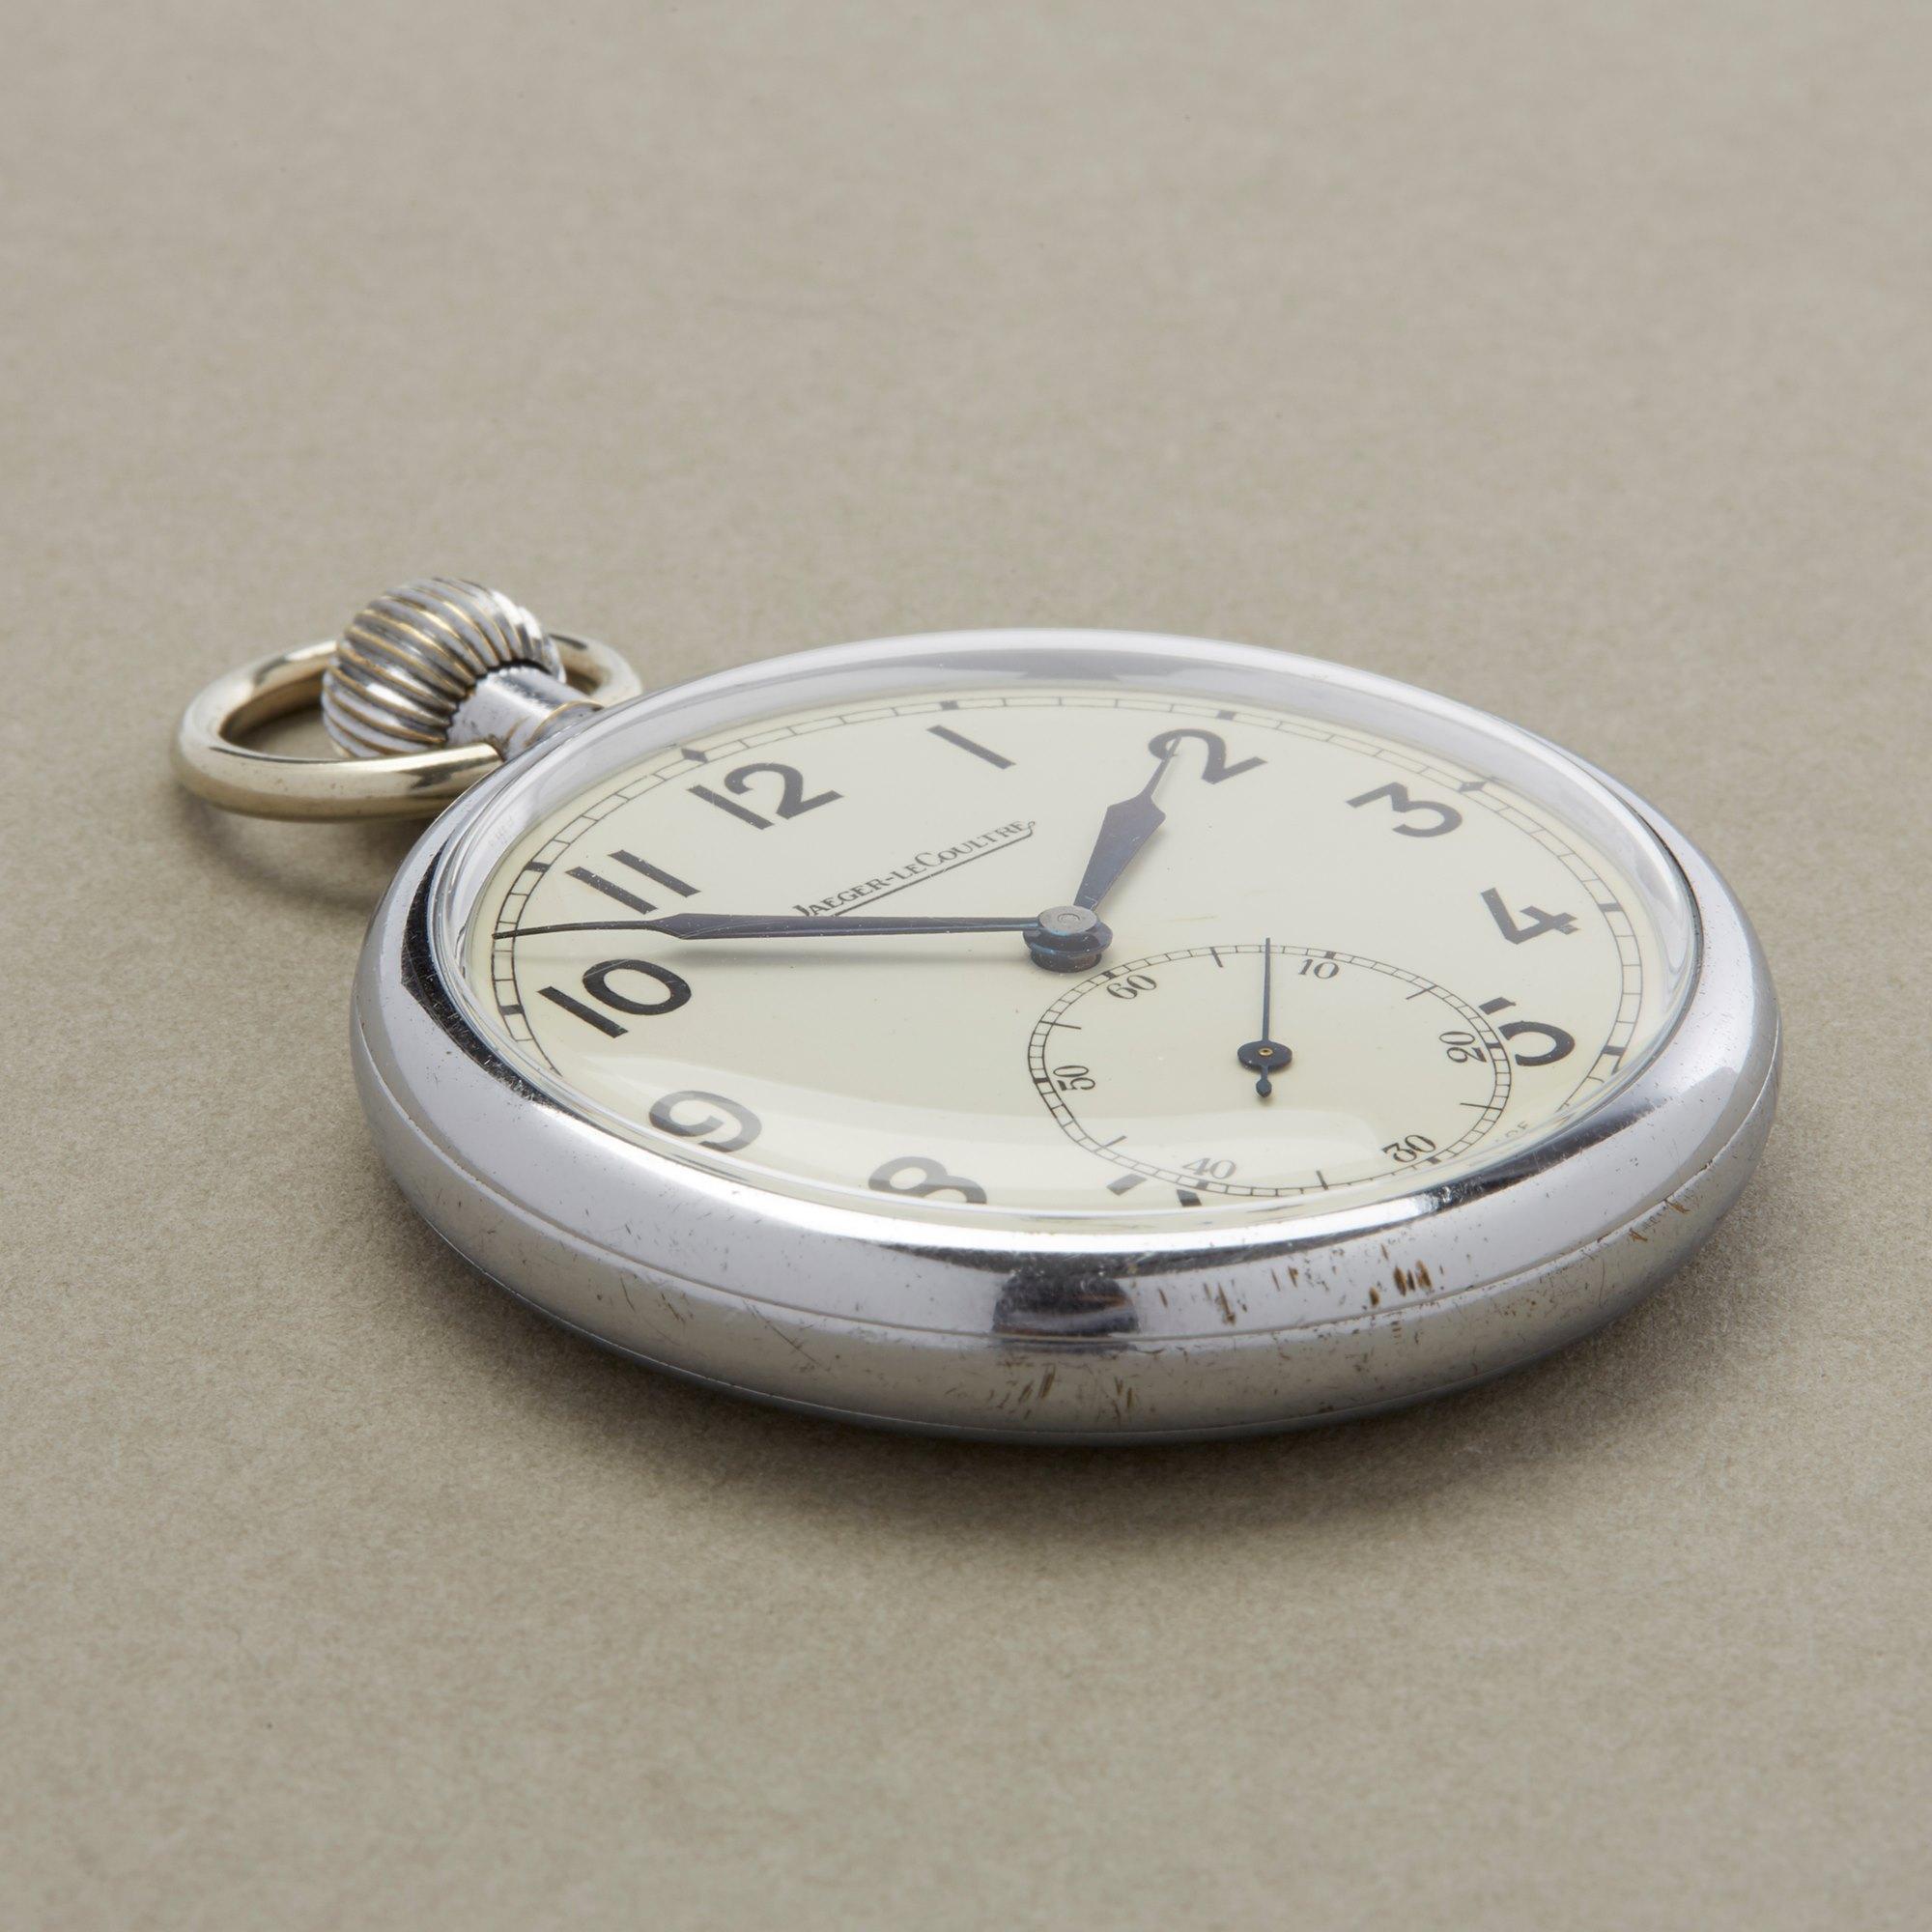 jaeger-lecoultre pocket watch